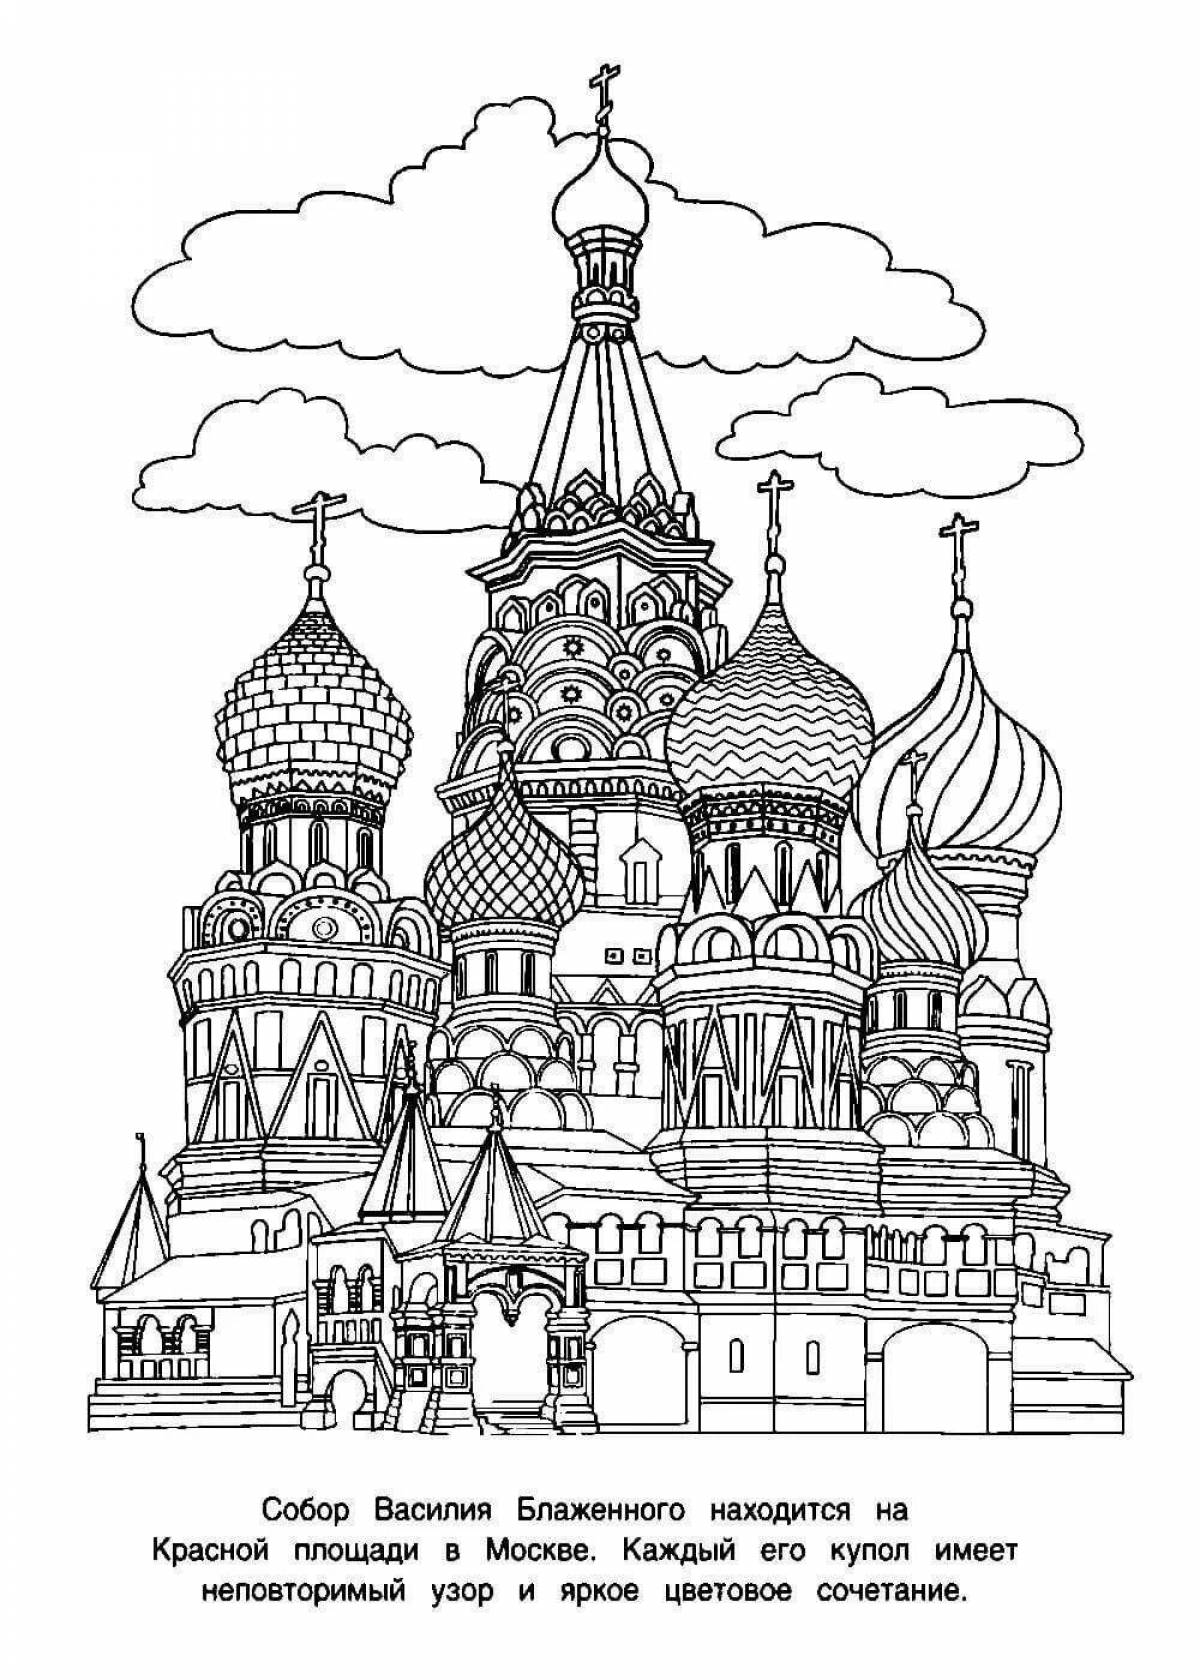 Charming russia my homeland coloring book for kids 6-7 years old